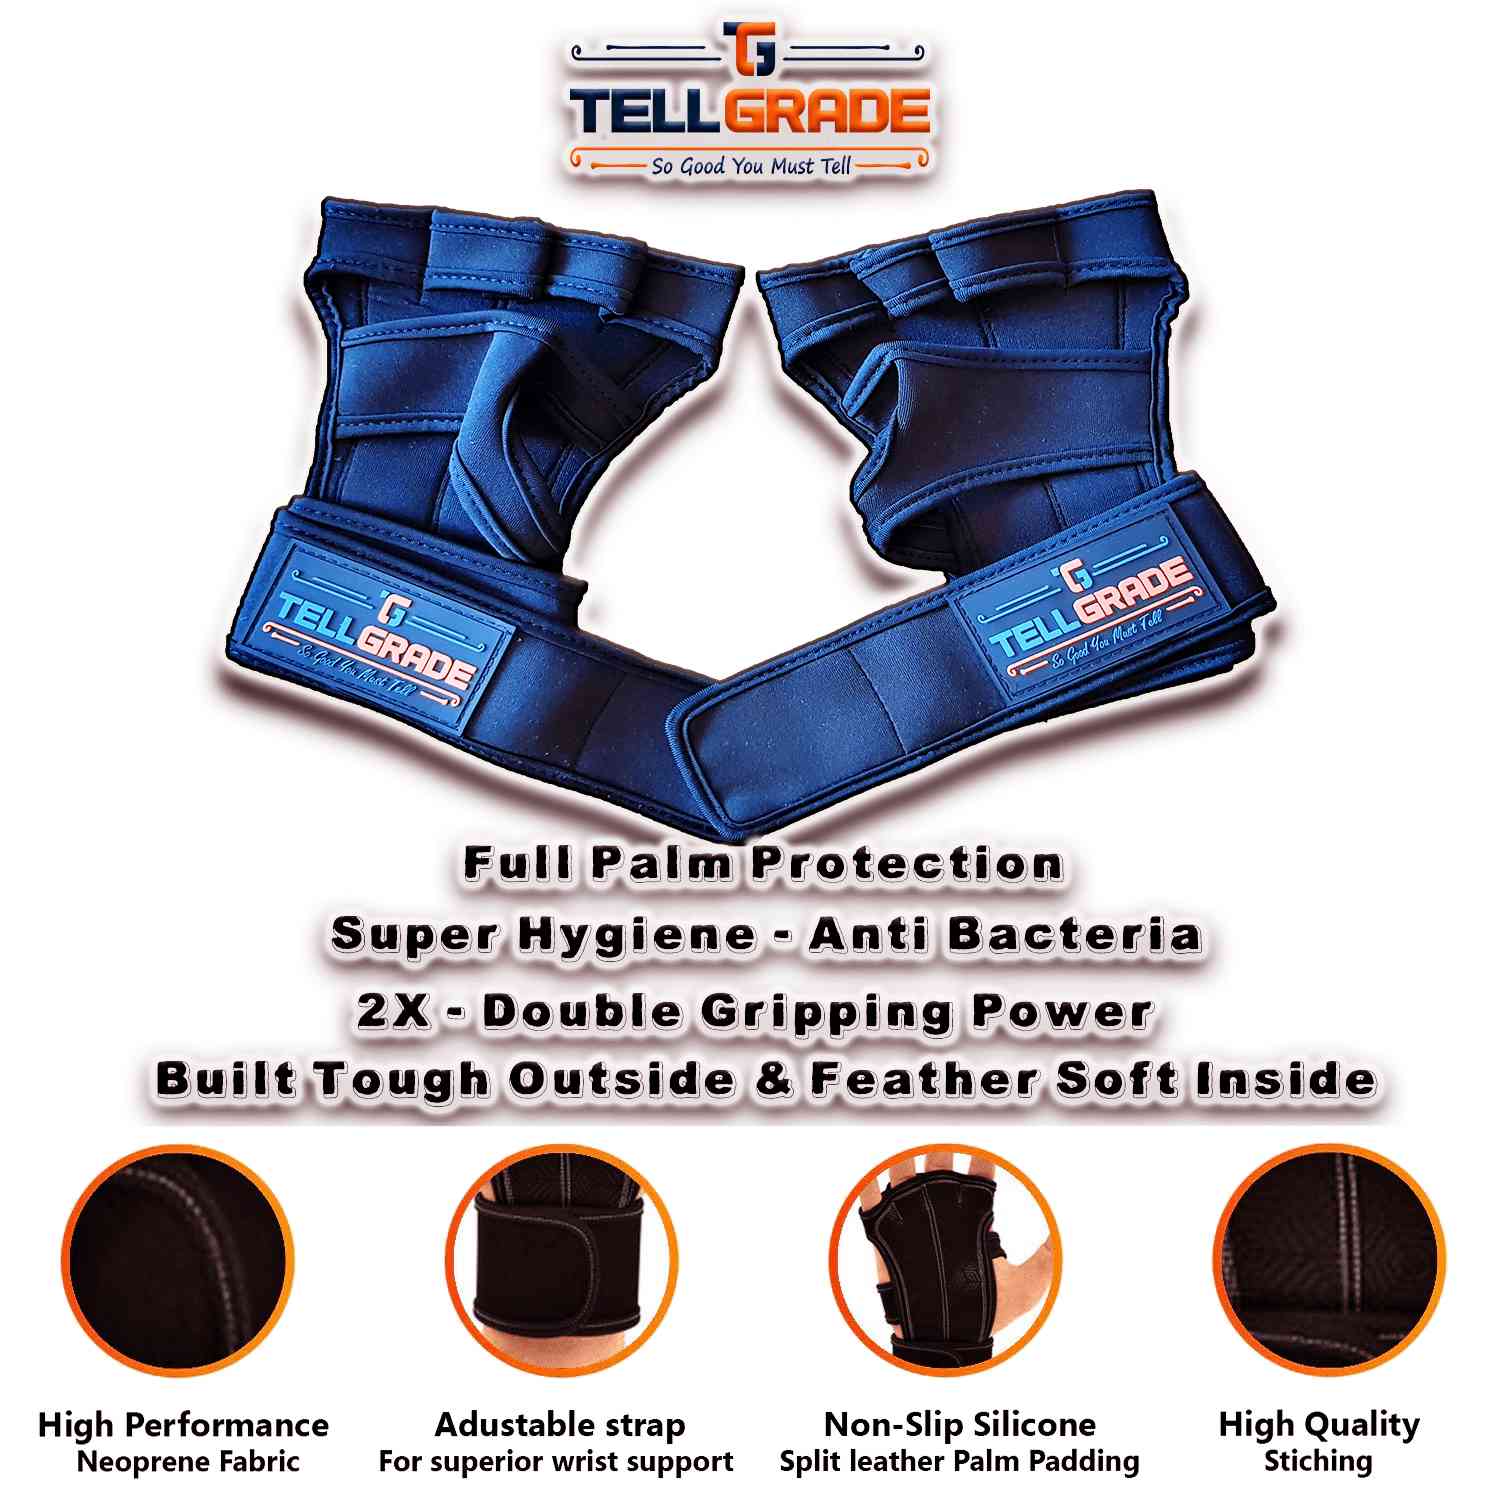 tellgrade ventilated fitness gloves with wrist wraps, full palm protection & extra grip poster 5a